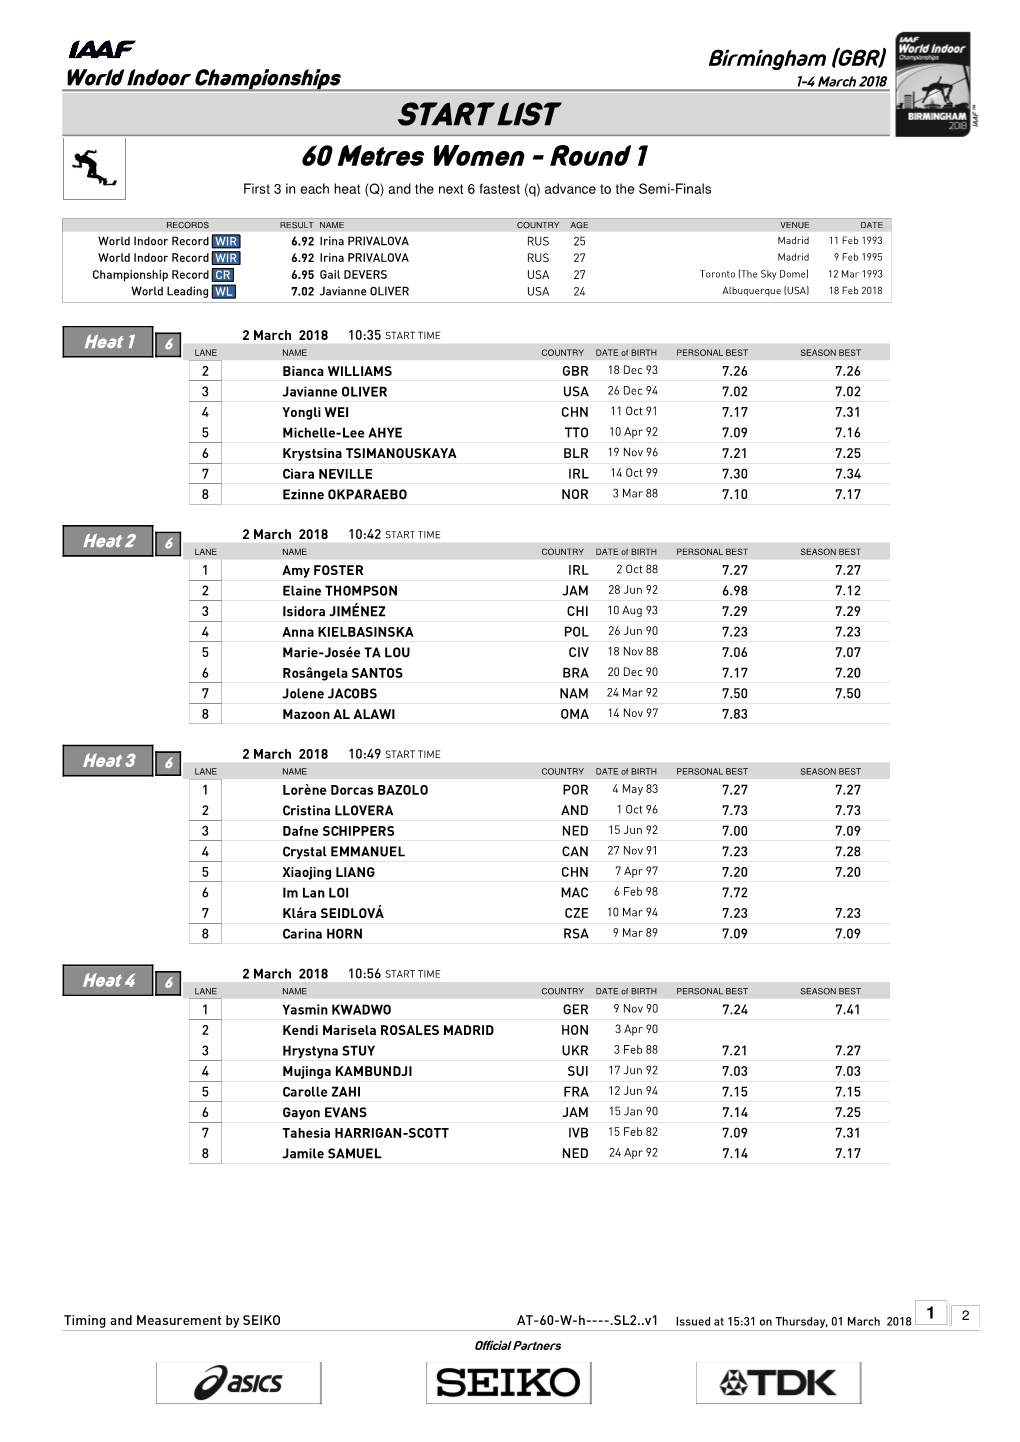 START LIST 60 Metres Women - Round 1 First 3 in Each Heat (Q) and the Next 6 Fastest (Q) Advance to the Semi-Finals